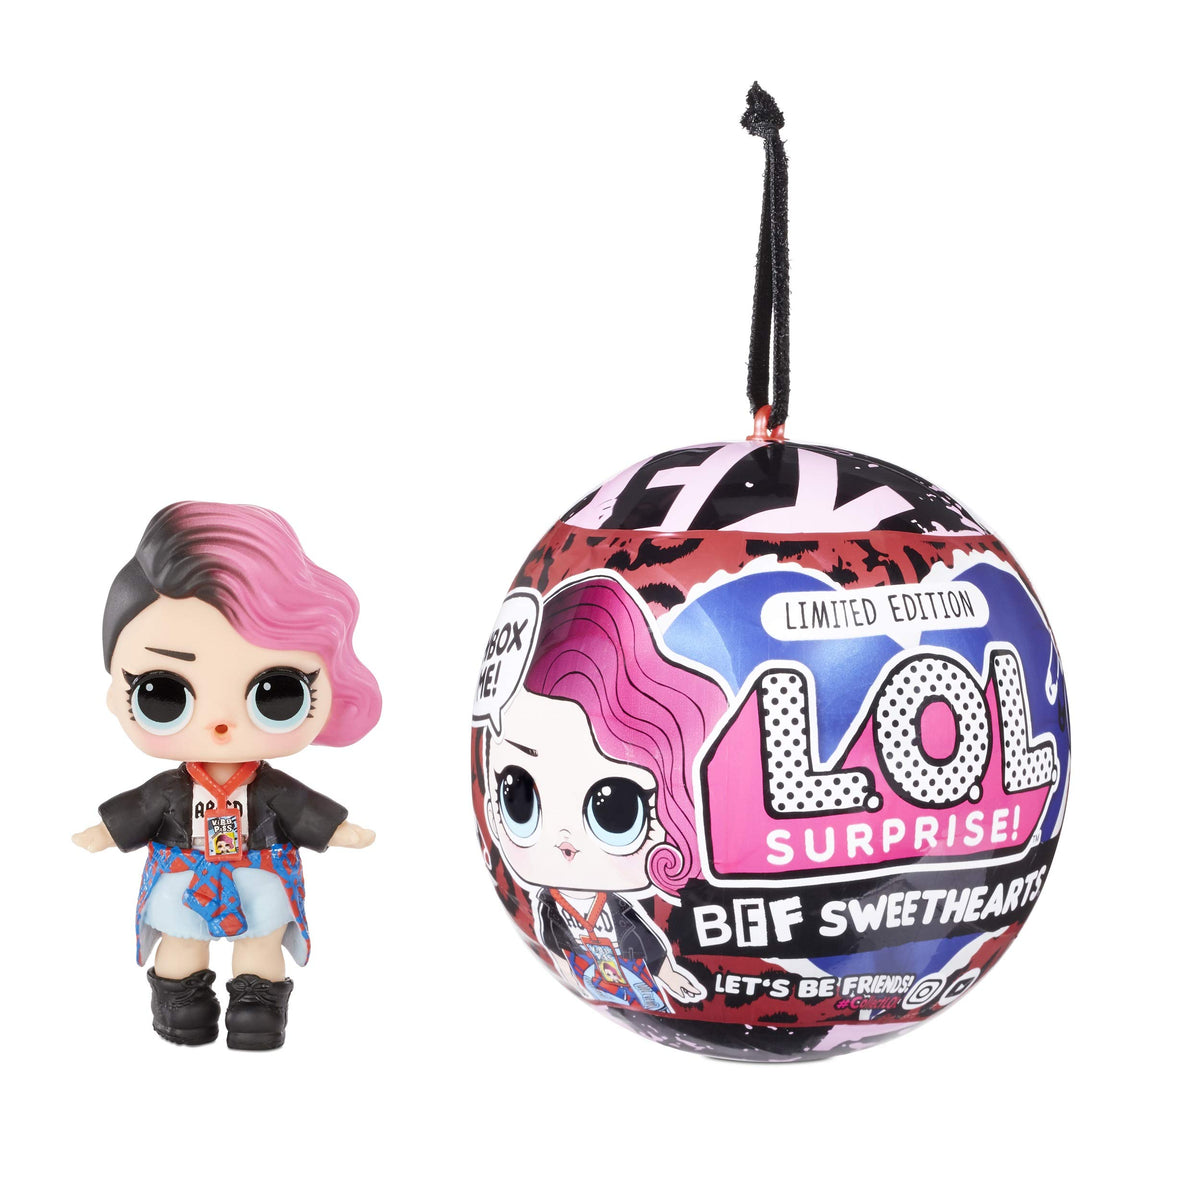 L.O.L SURPRISE VALENTINES BFF SWEETHEARTS